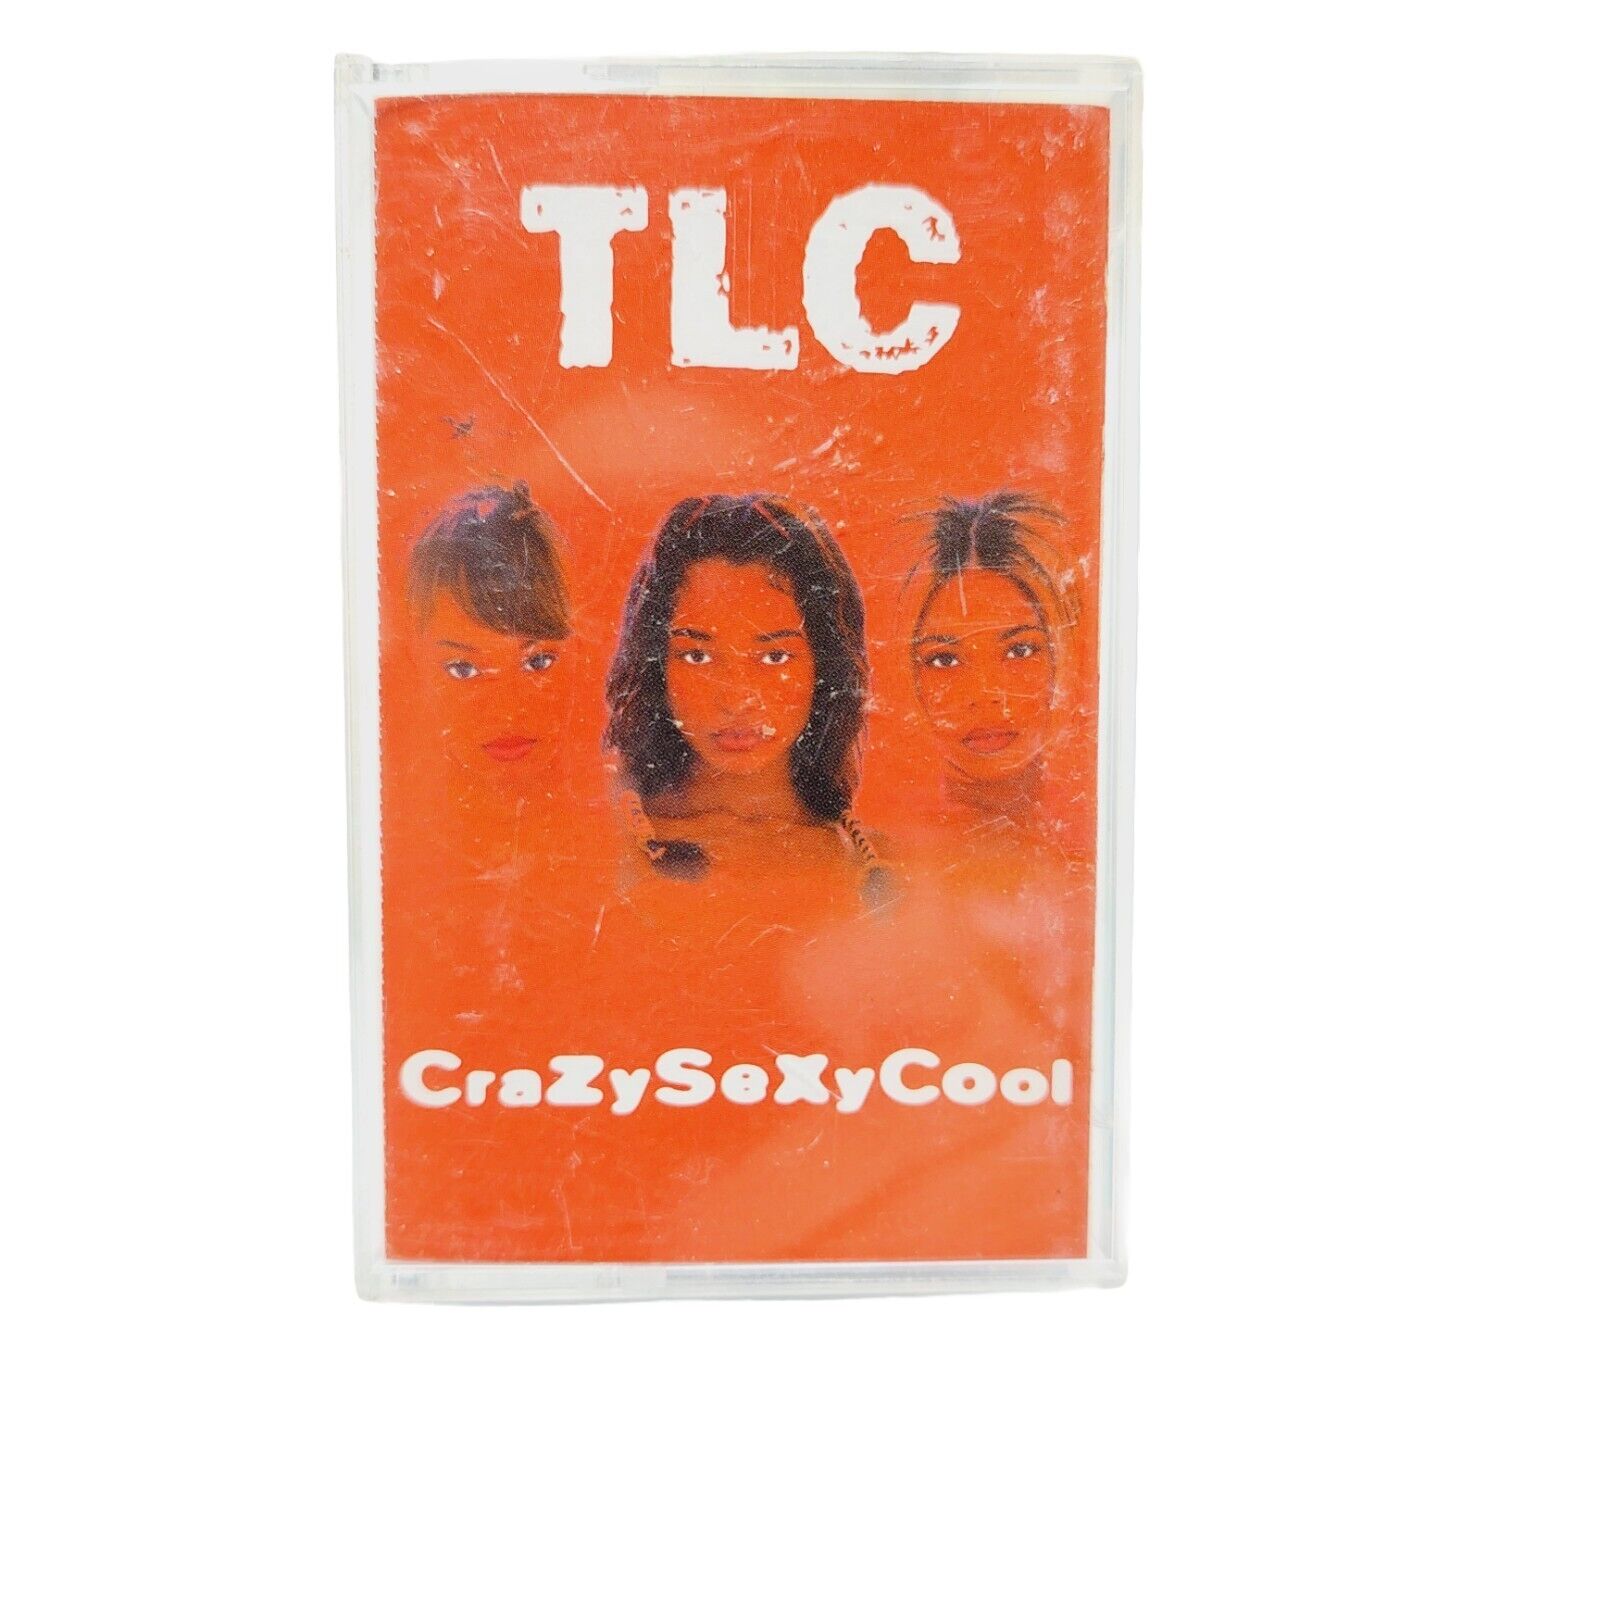 CrazySexyCool by TLC Cassette Tape (1994 LaFace) CrazySexyCool